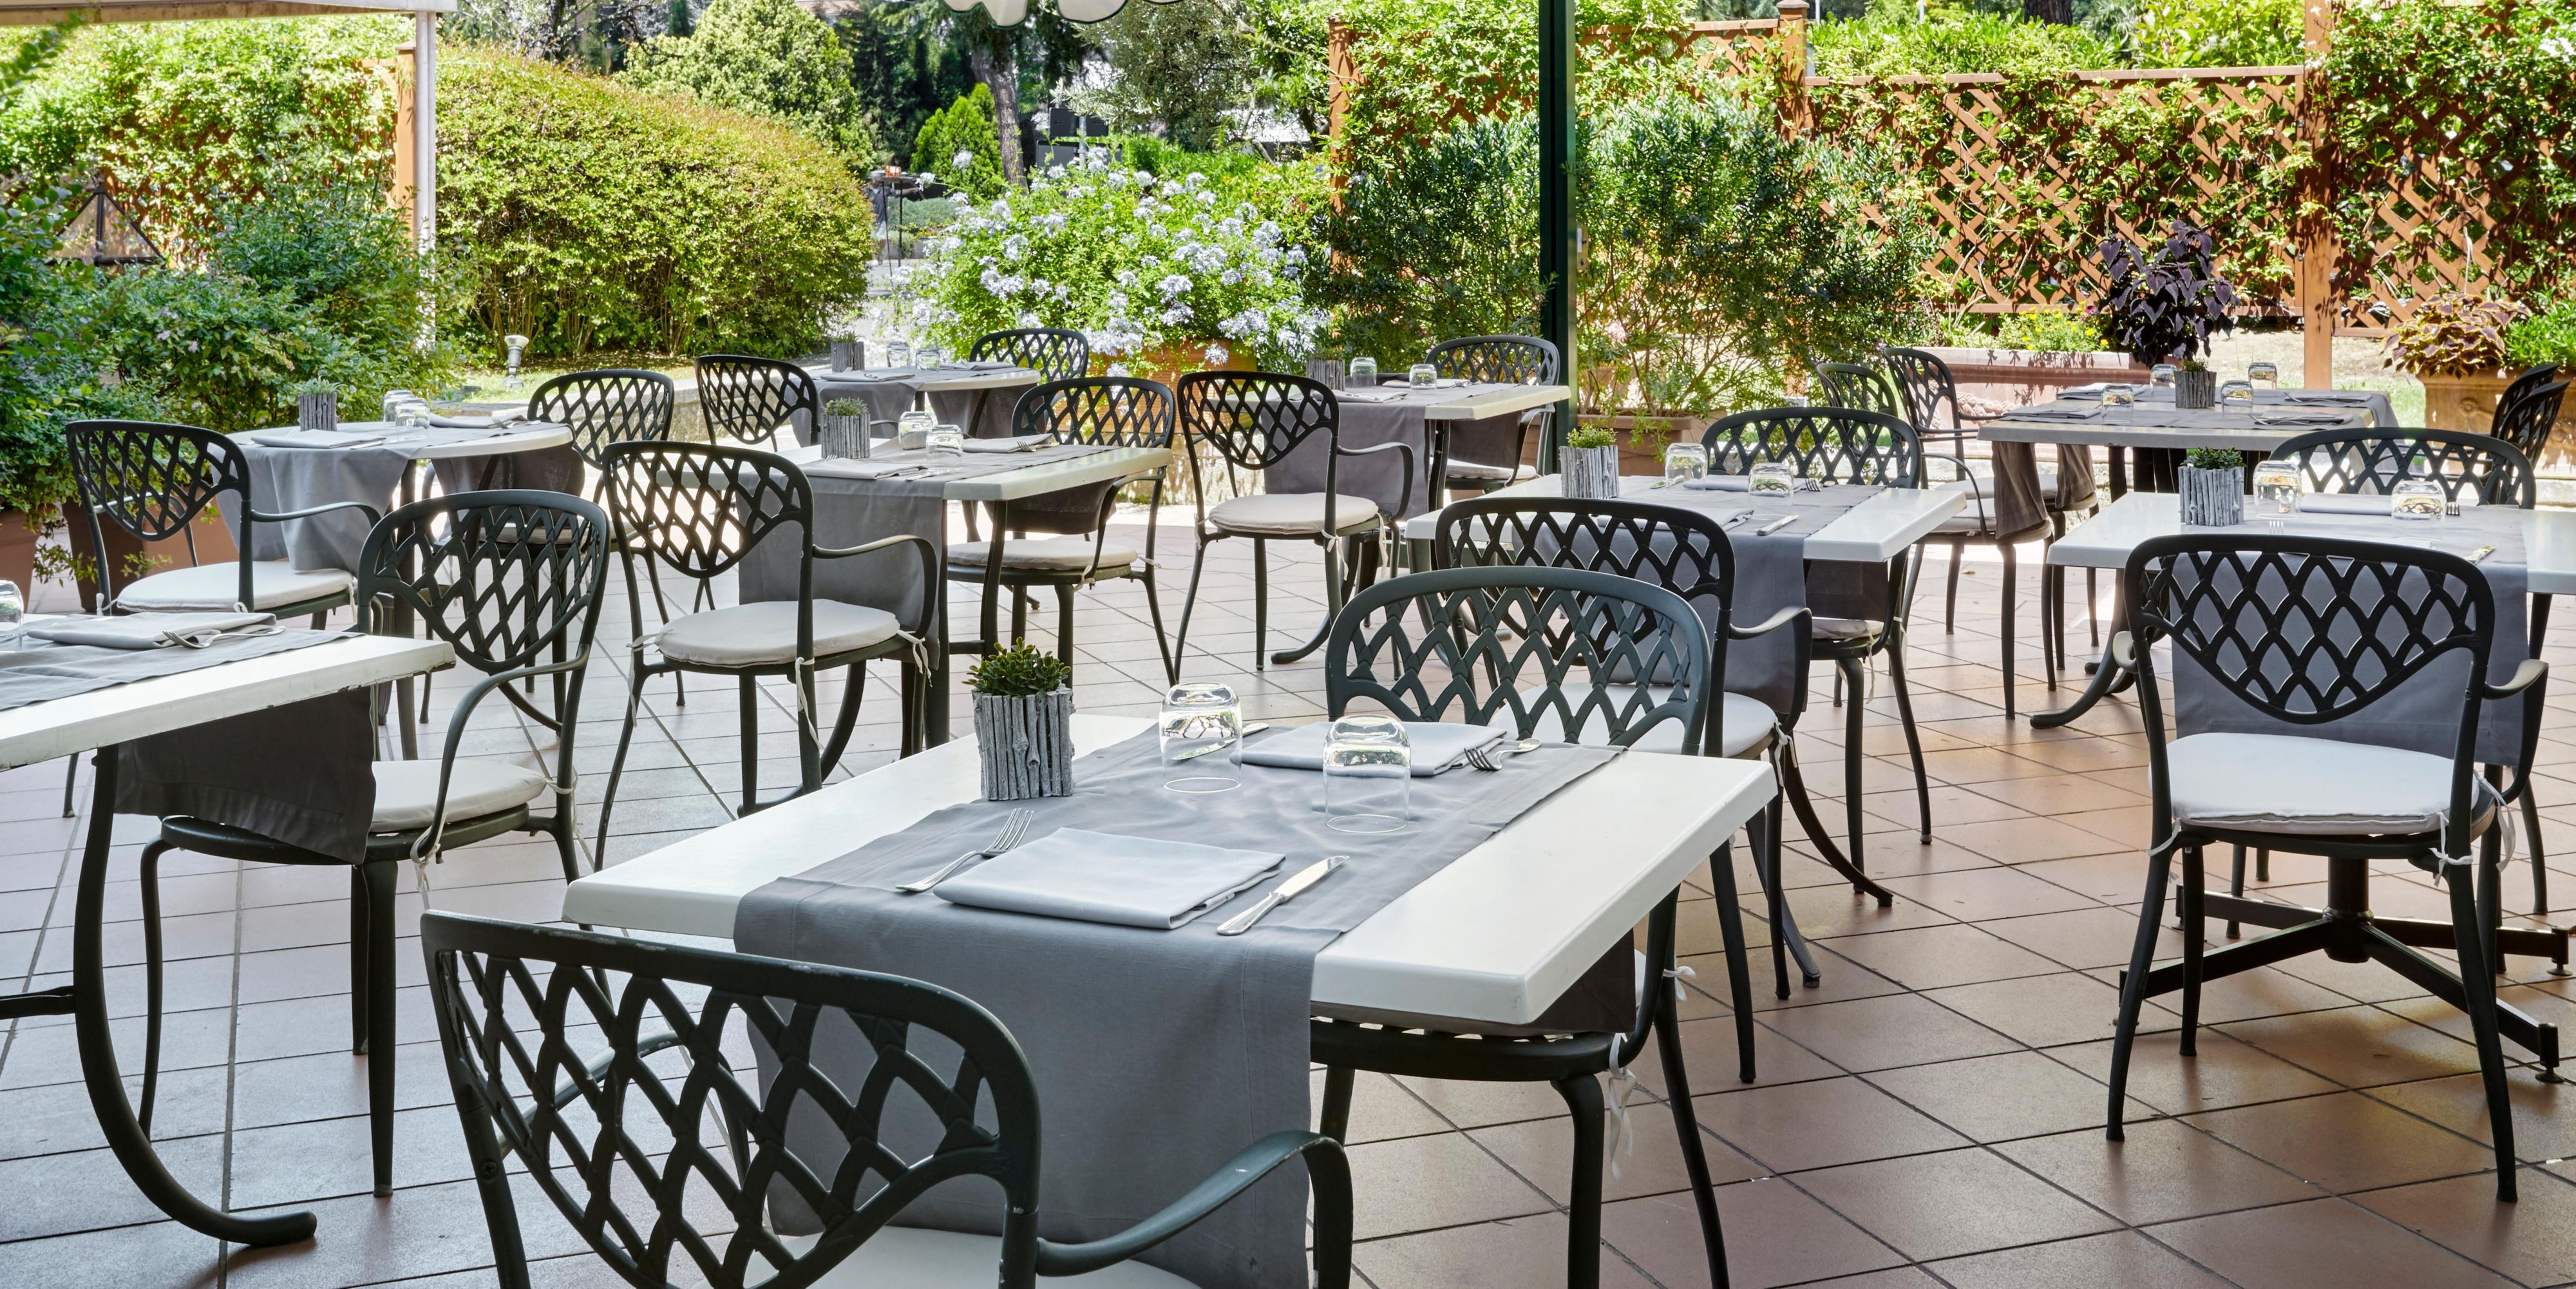 Enjoy the lovely temperature of Rome in our Papillon Restaurant